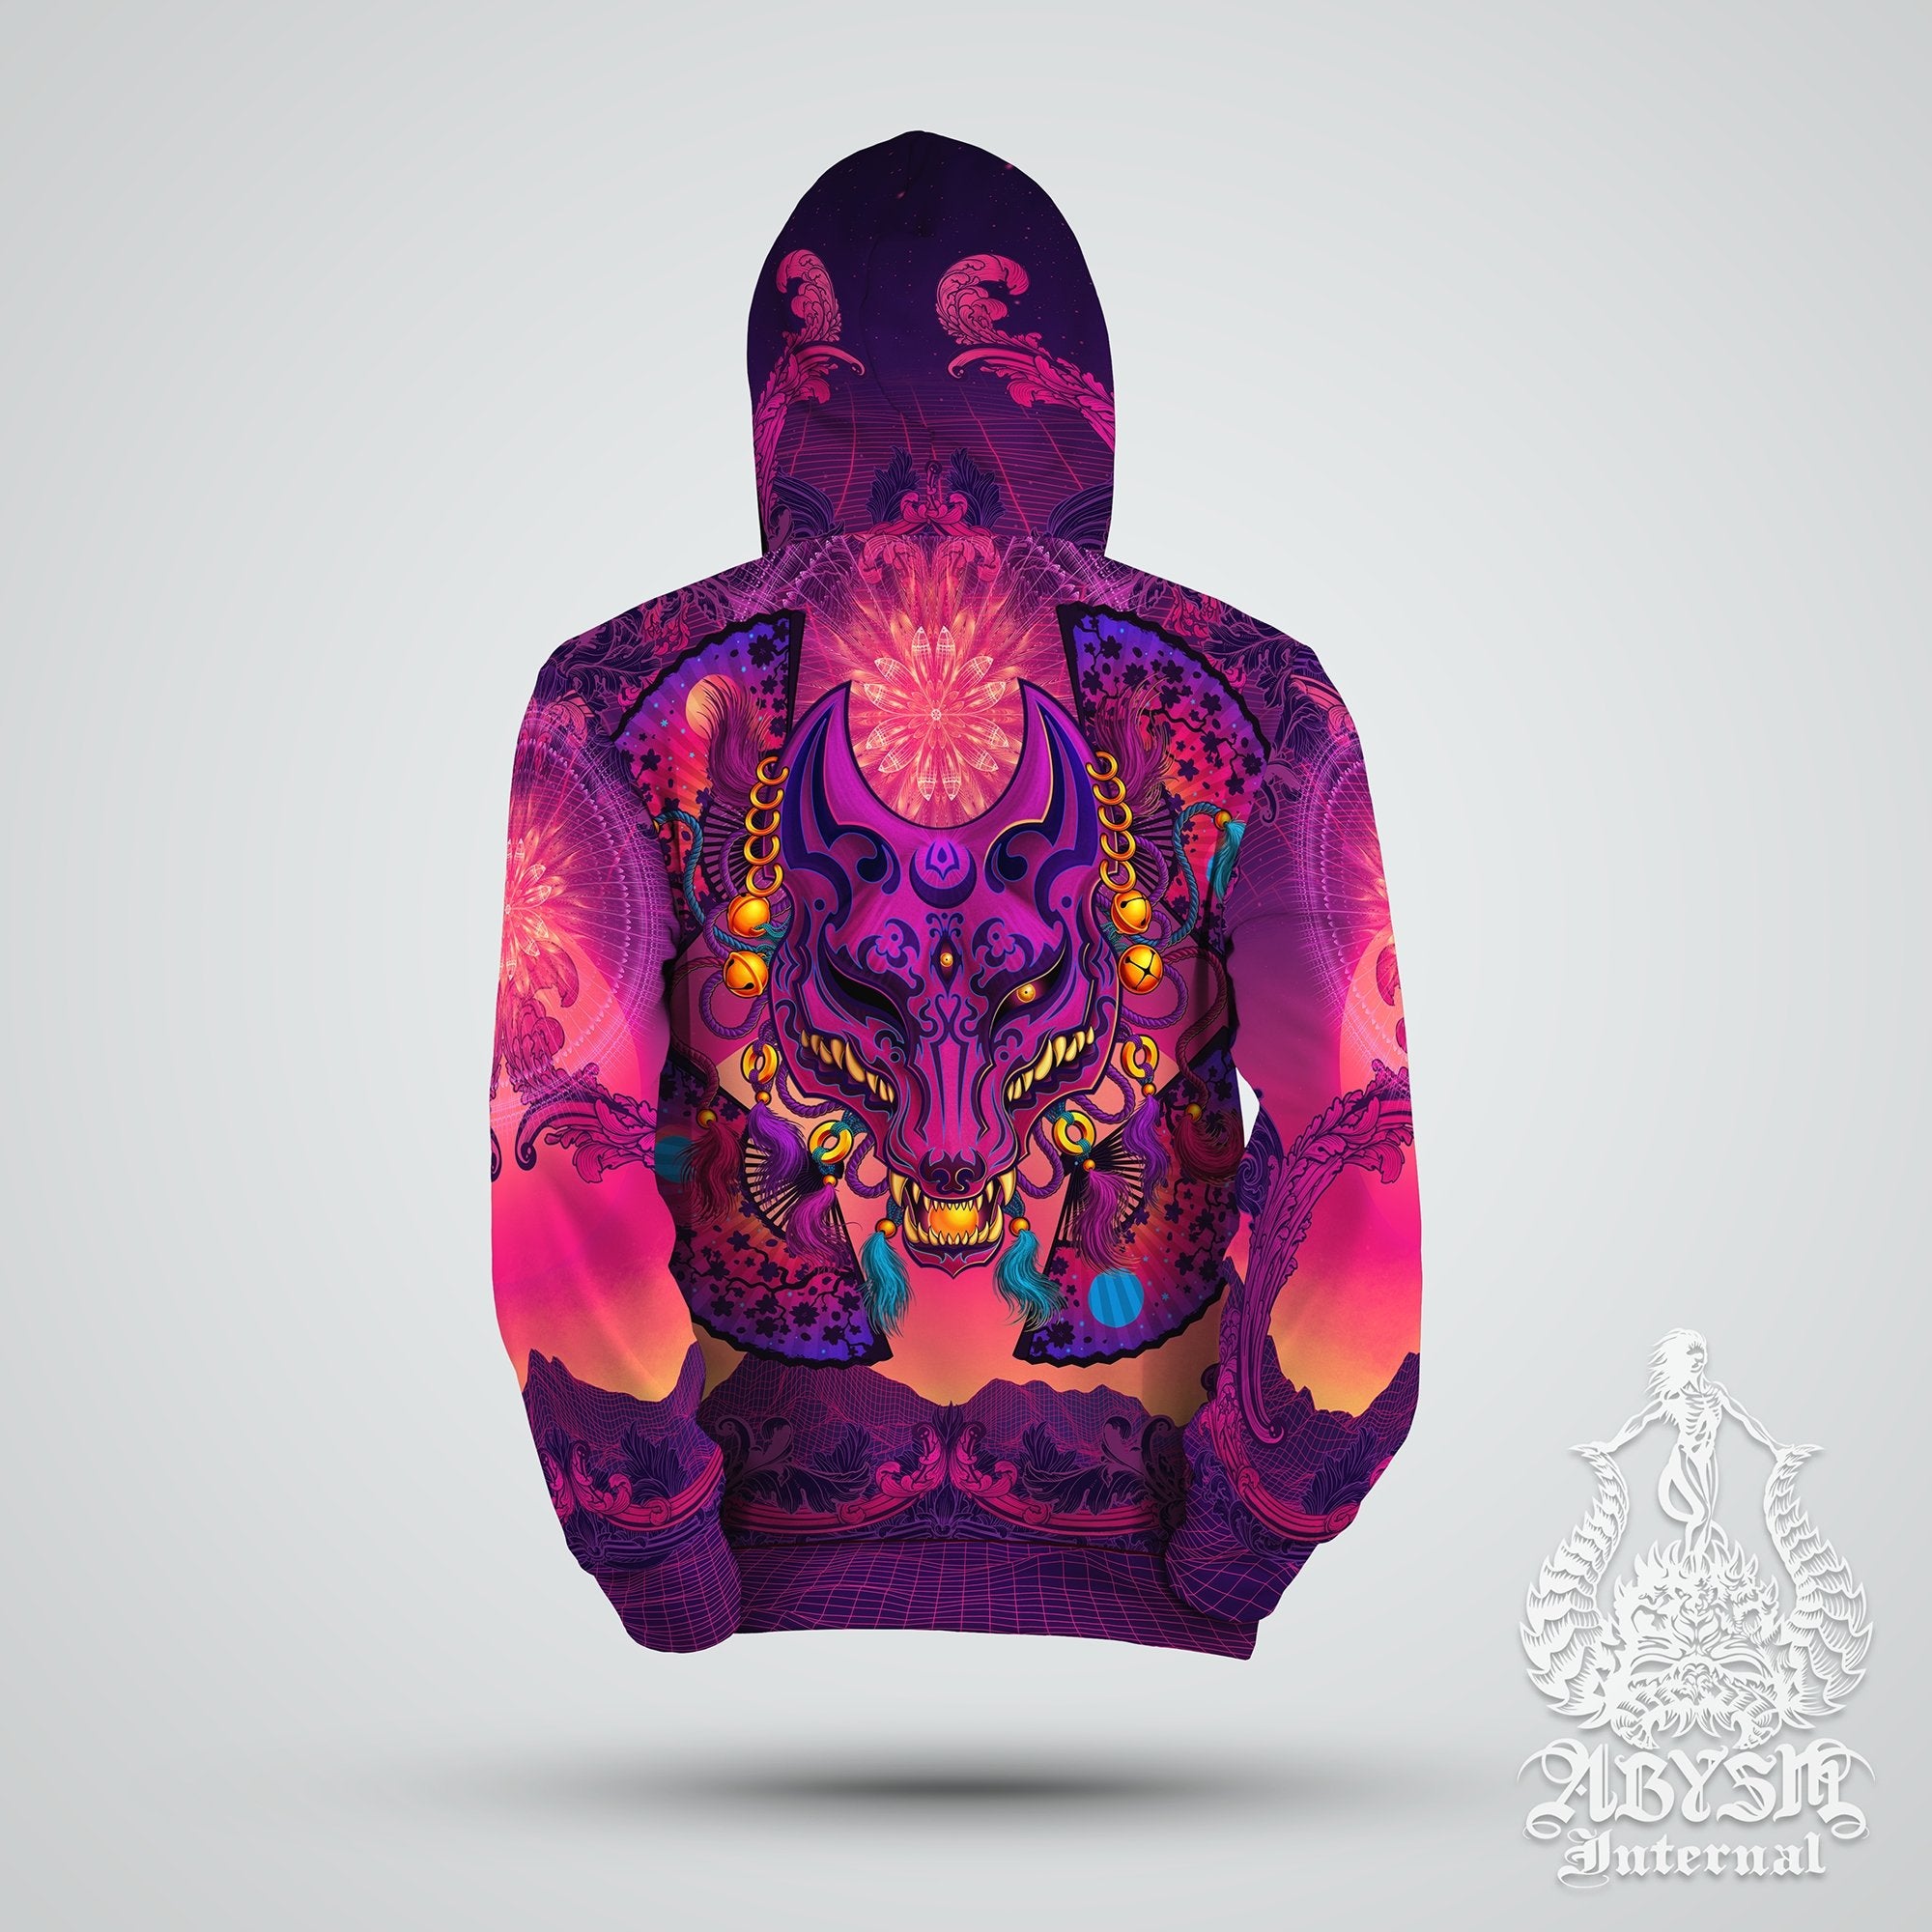 Japanese Vaporwave Hoodie, Trippy Outfit, Gamer Streetwear, Psychedelic  Festival Sweater, Funky Pullover, Anime Gift, Unisex - Retrowave Kitsune